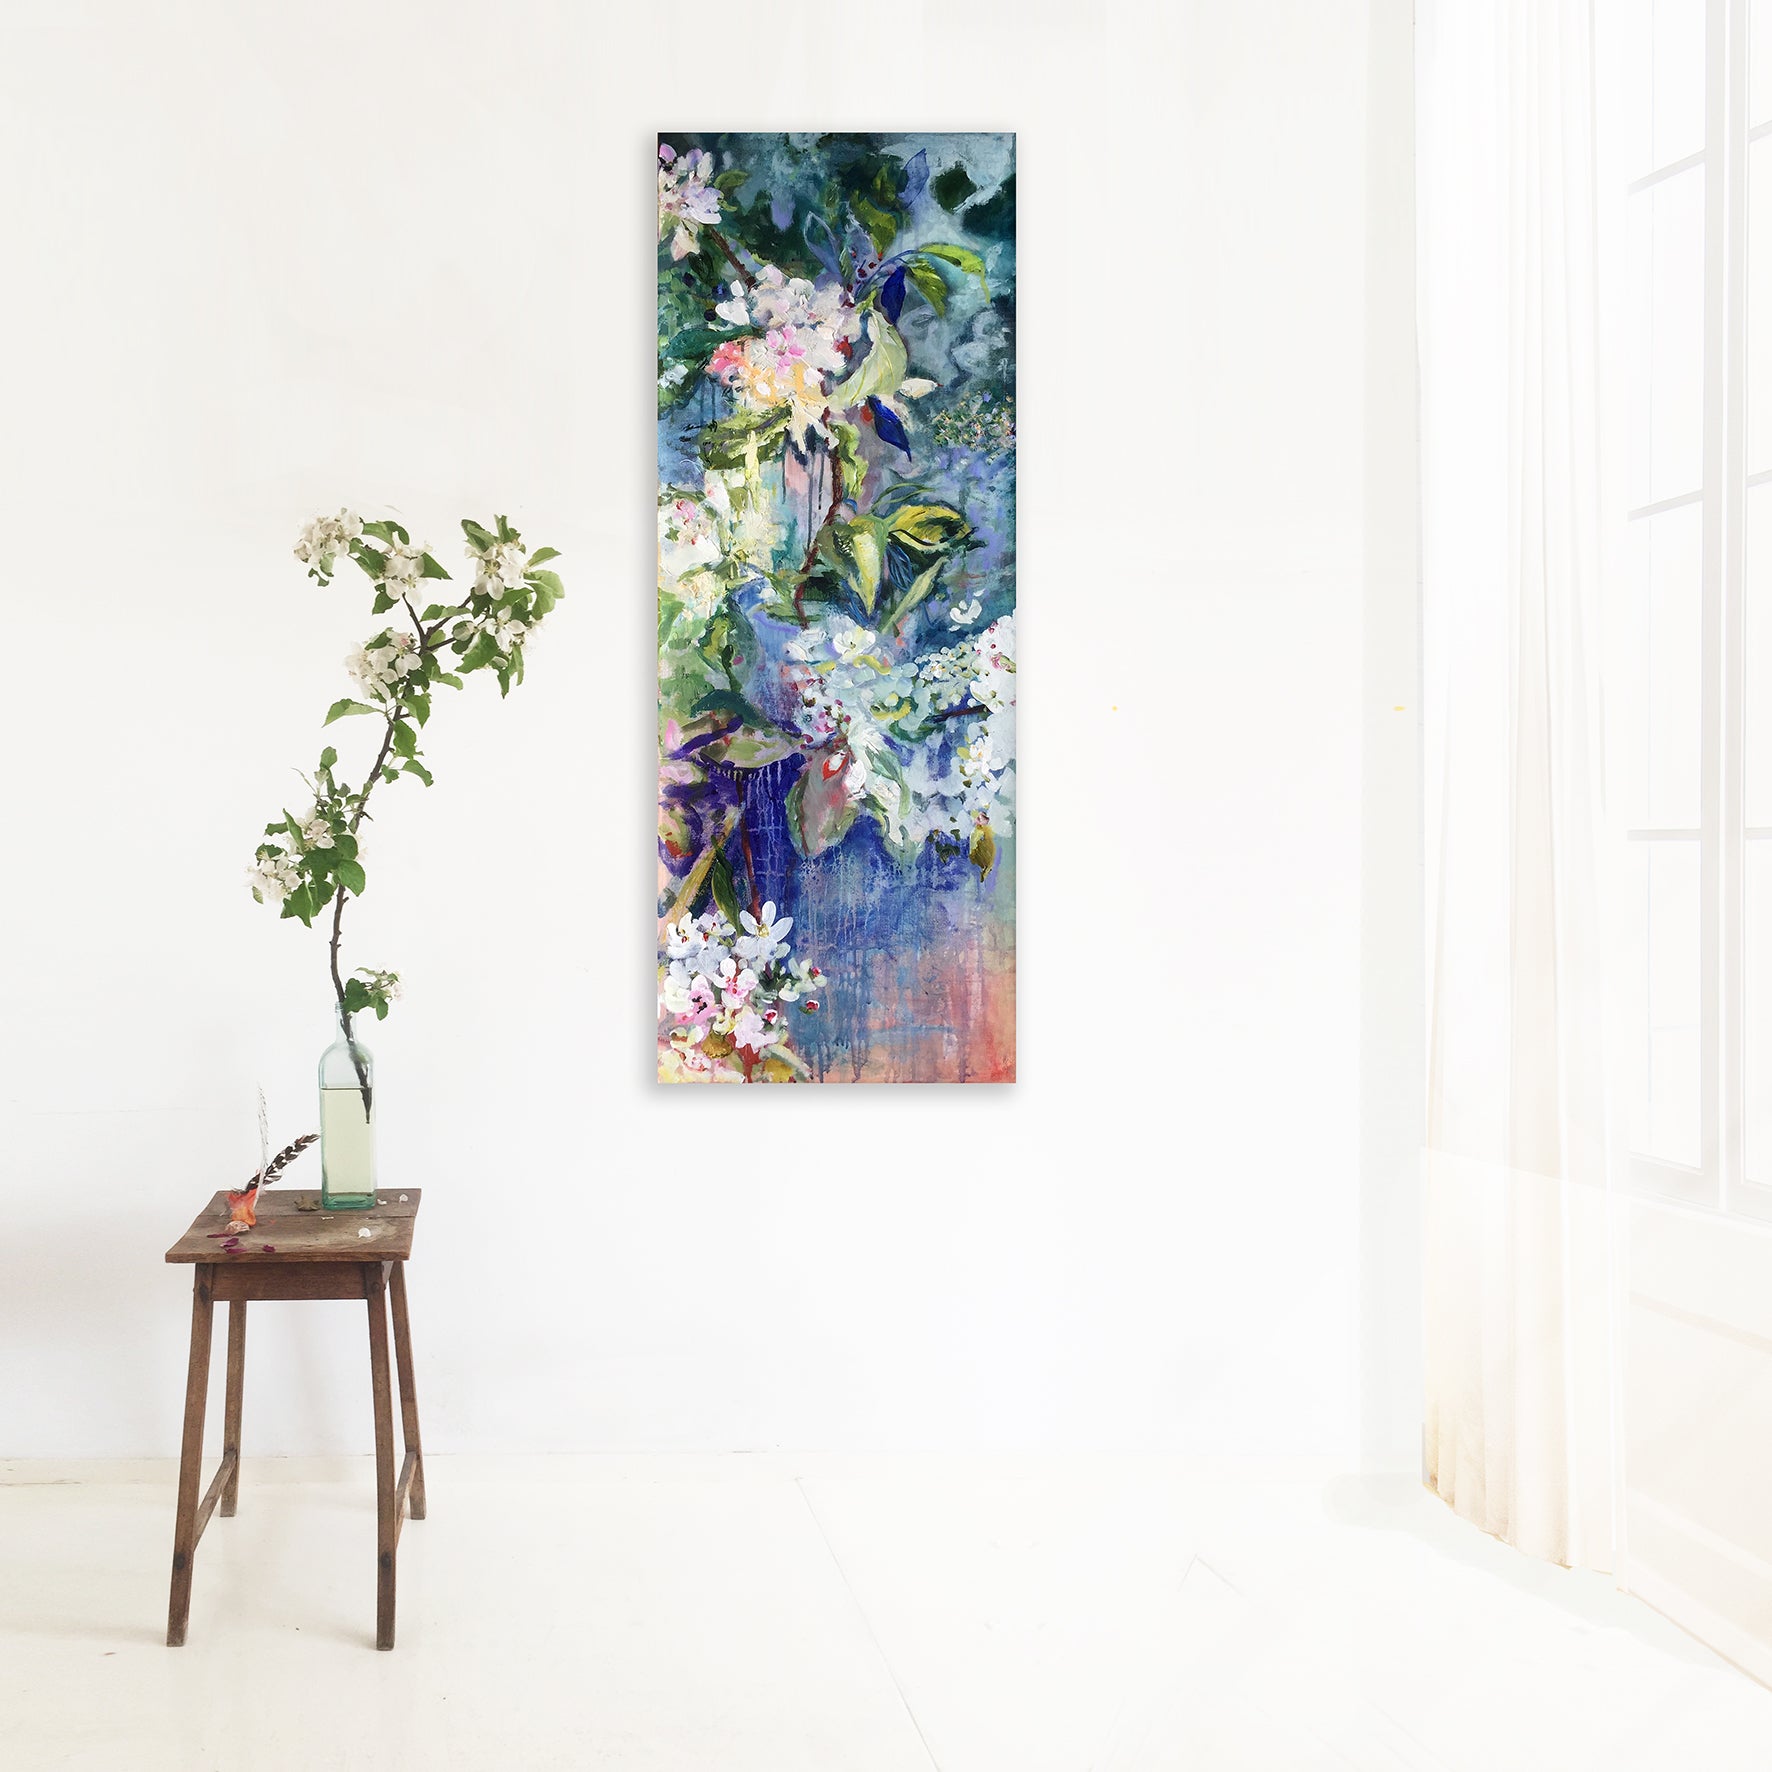 Interior with Blue Blossoms